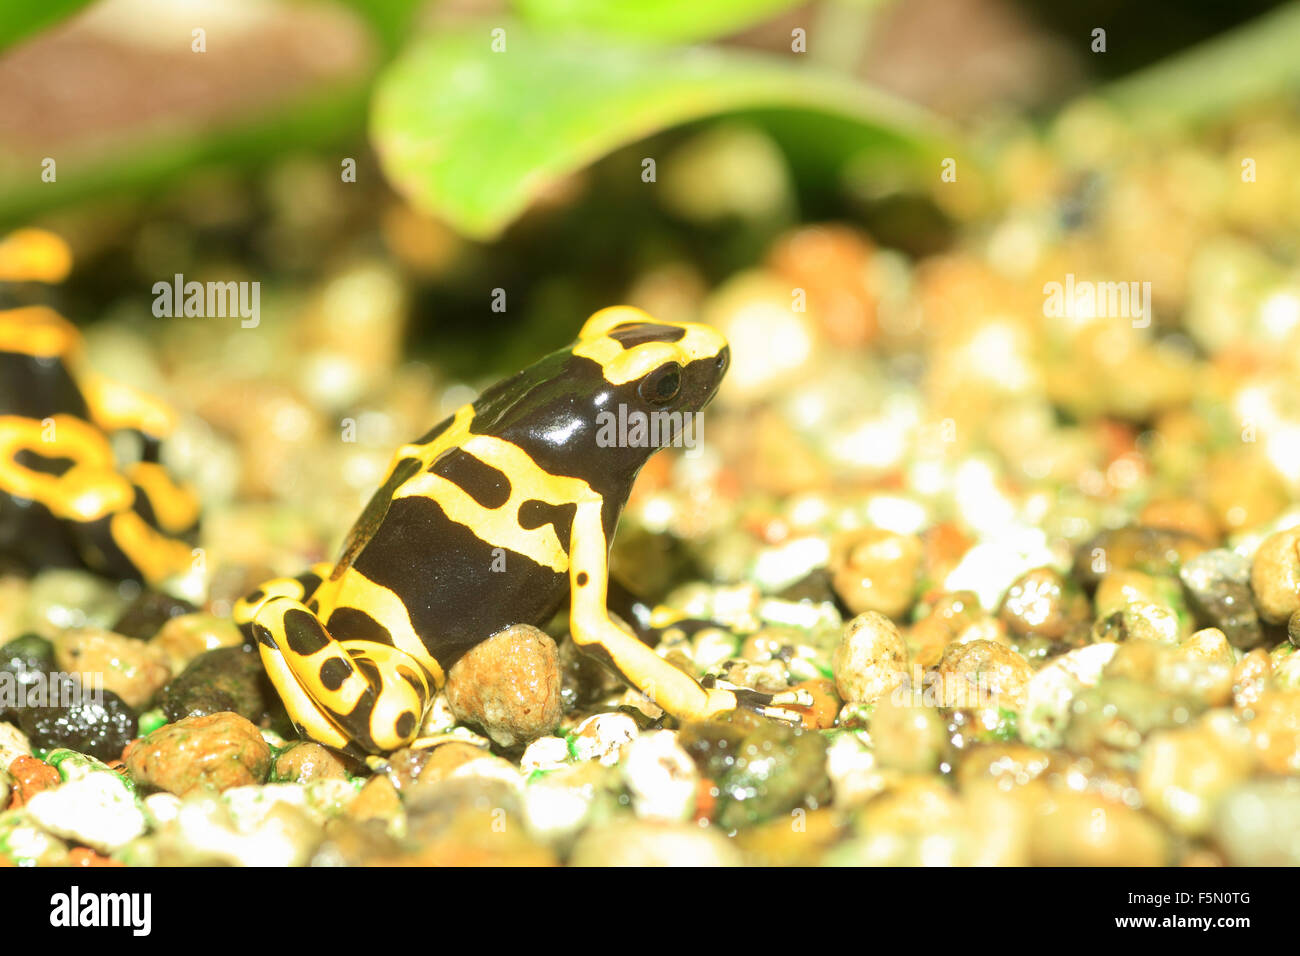 Yellow-headed poison frog or Yellow-banded poison dart frog (Dendrobates leucomelas) in South America Stock Photo